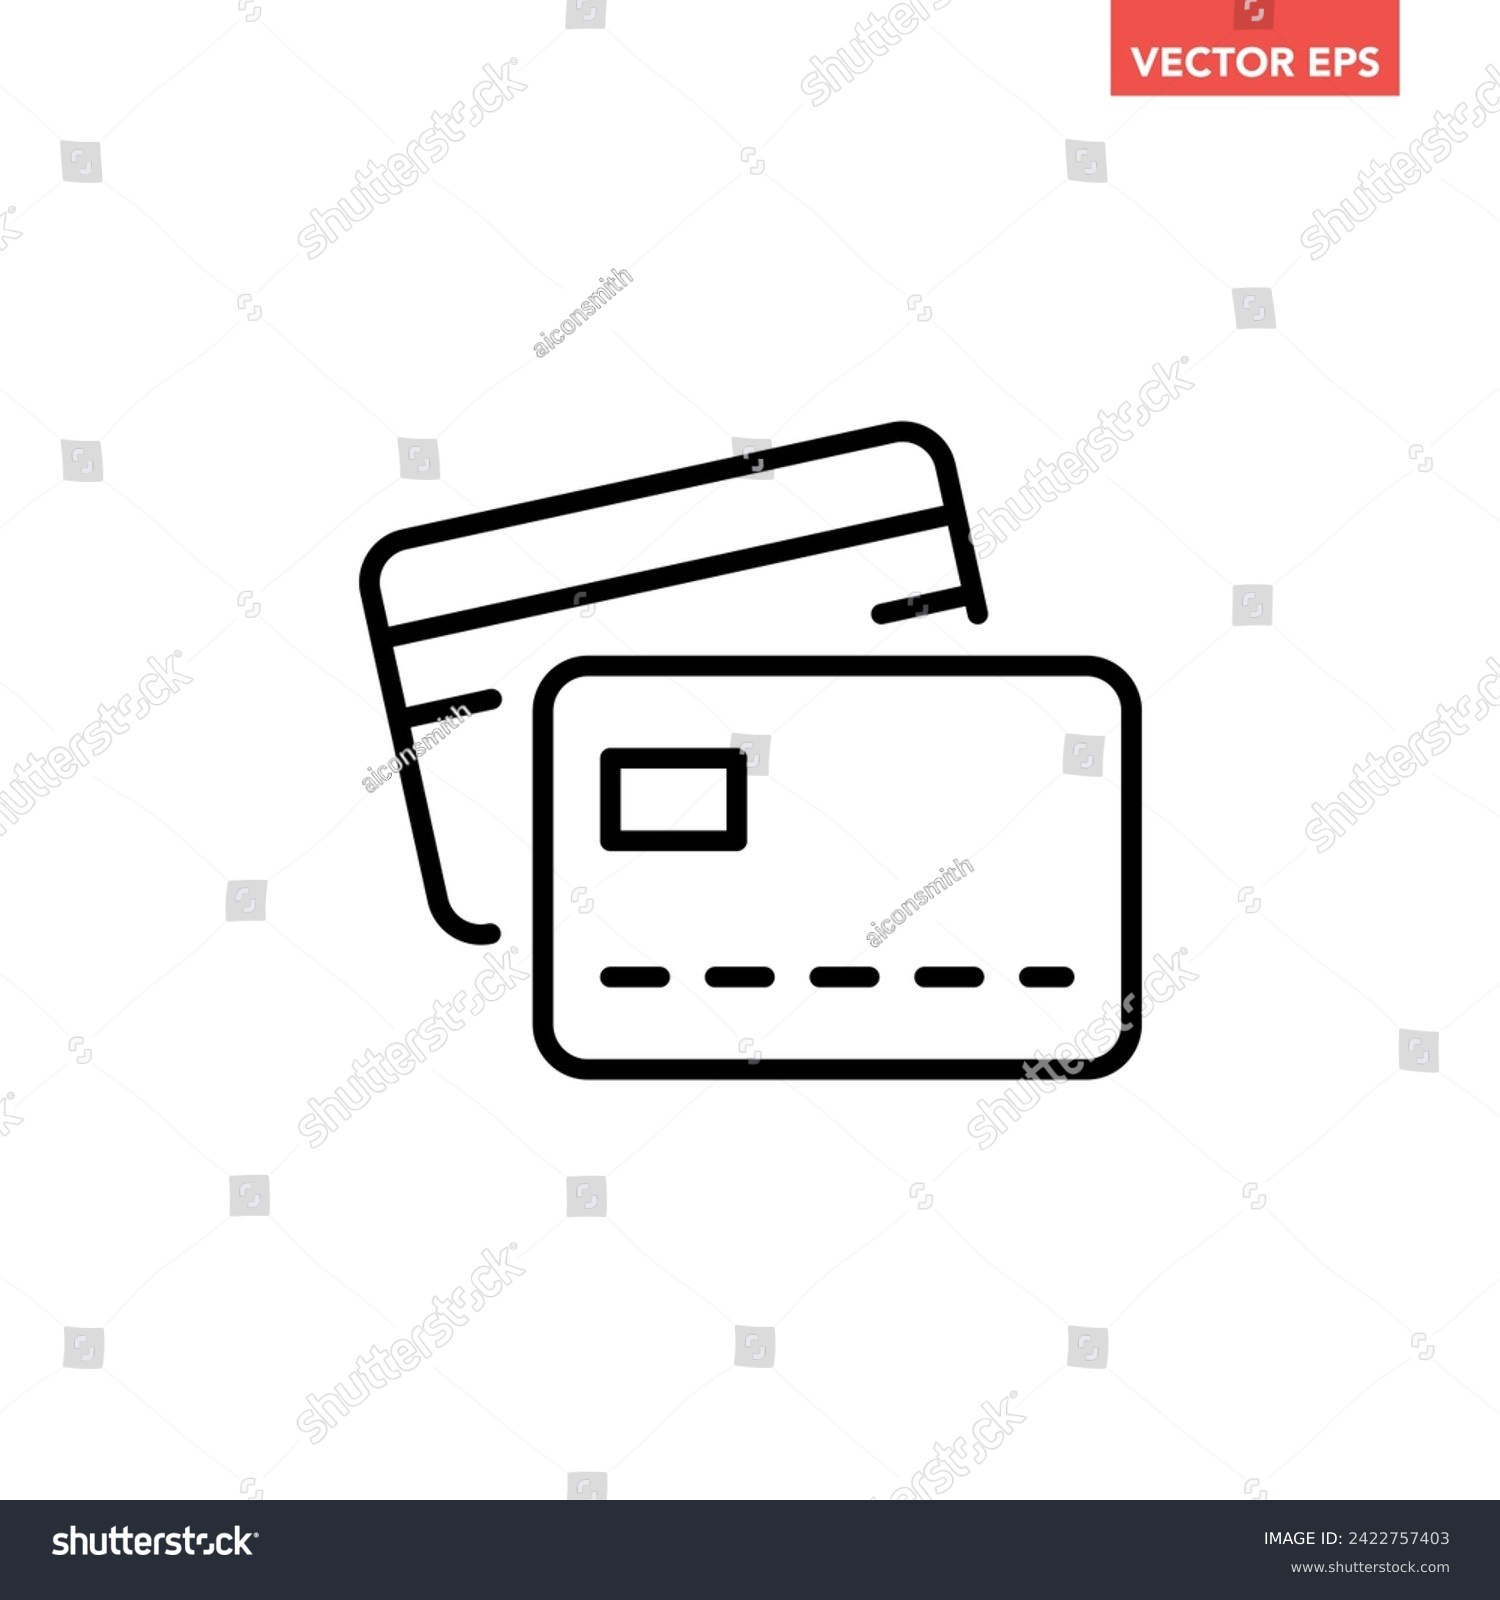 SVG of Black single multi credit cards line icon, simple financial transaction flat design infographic pictogram vector, app logo web button ui ux interface elements isolated on white background svg